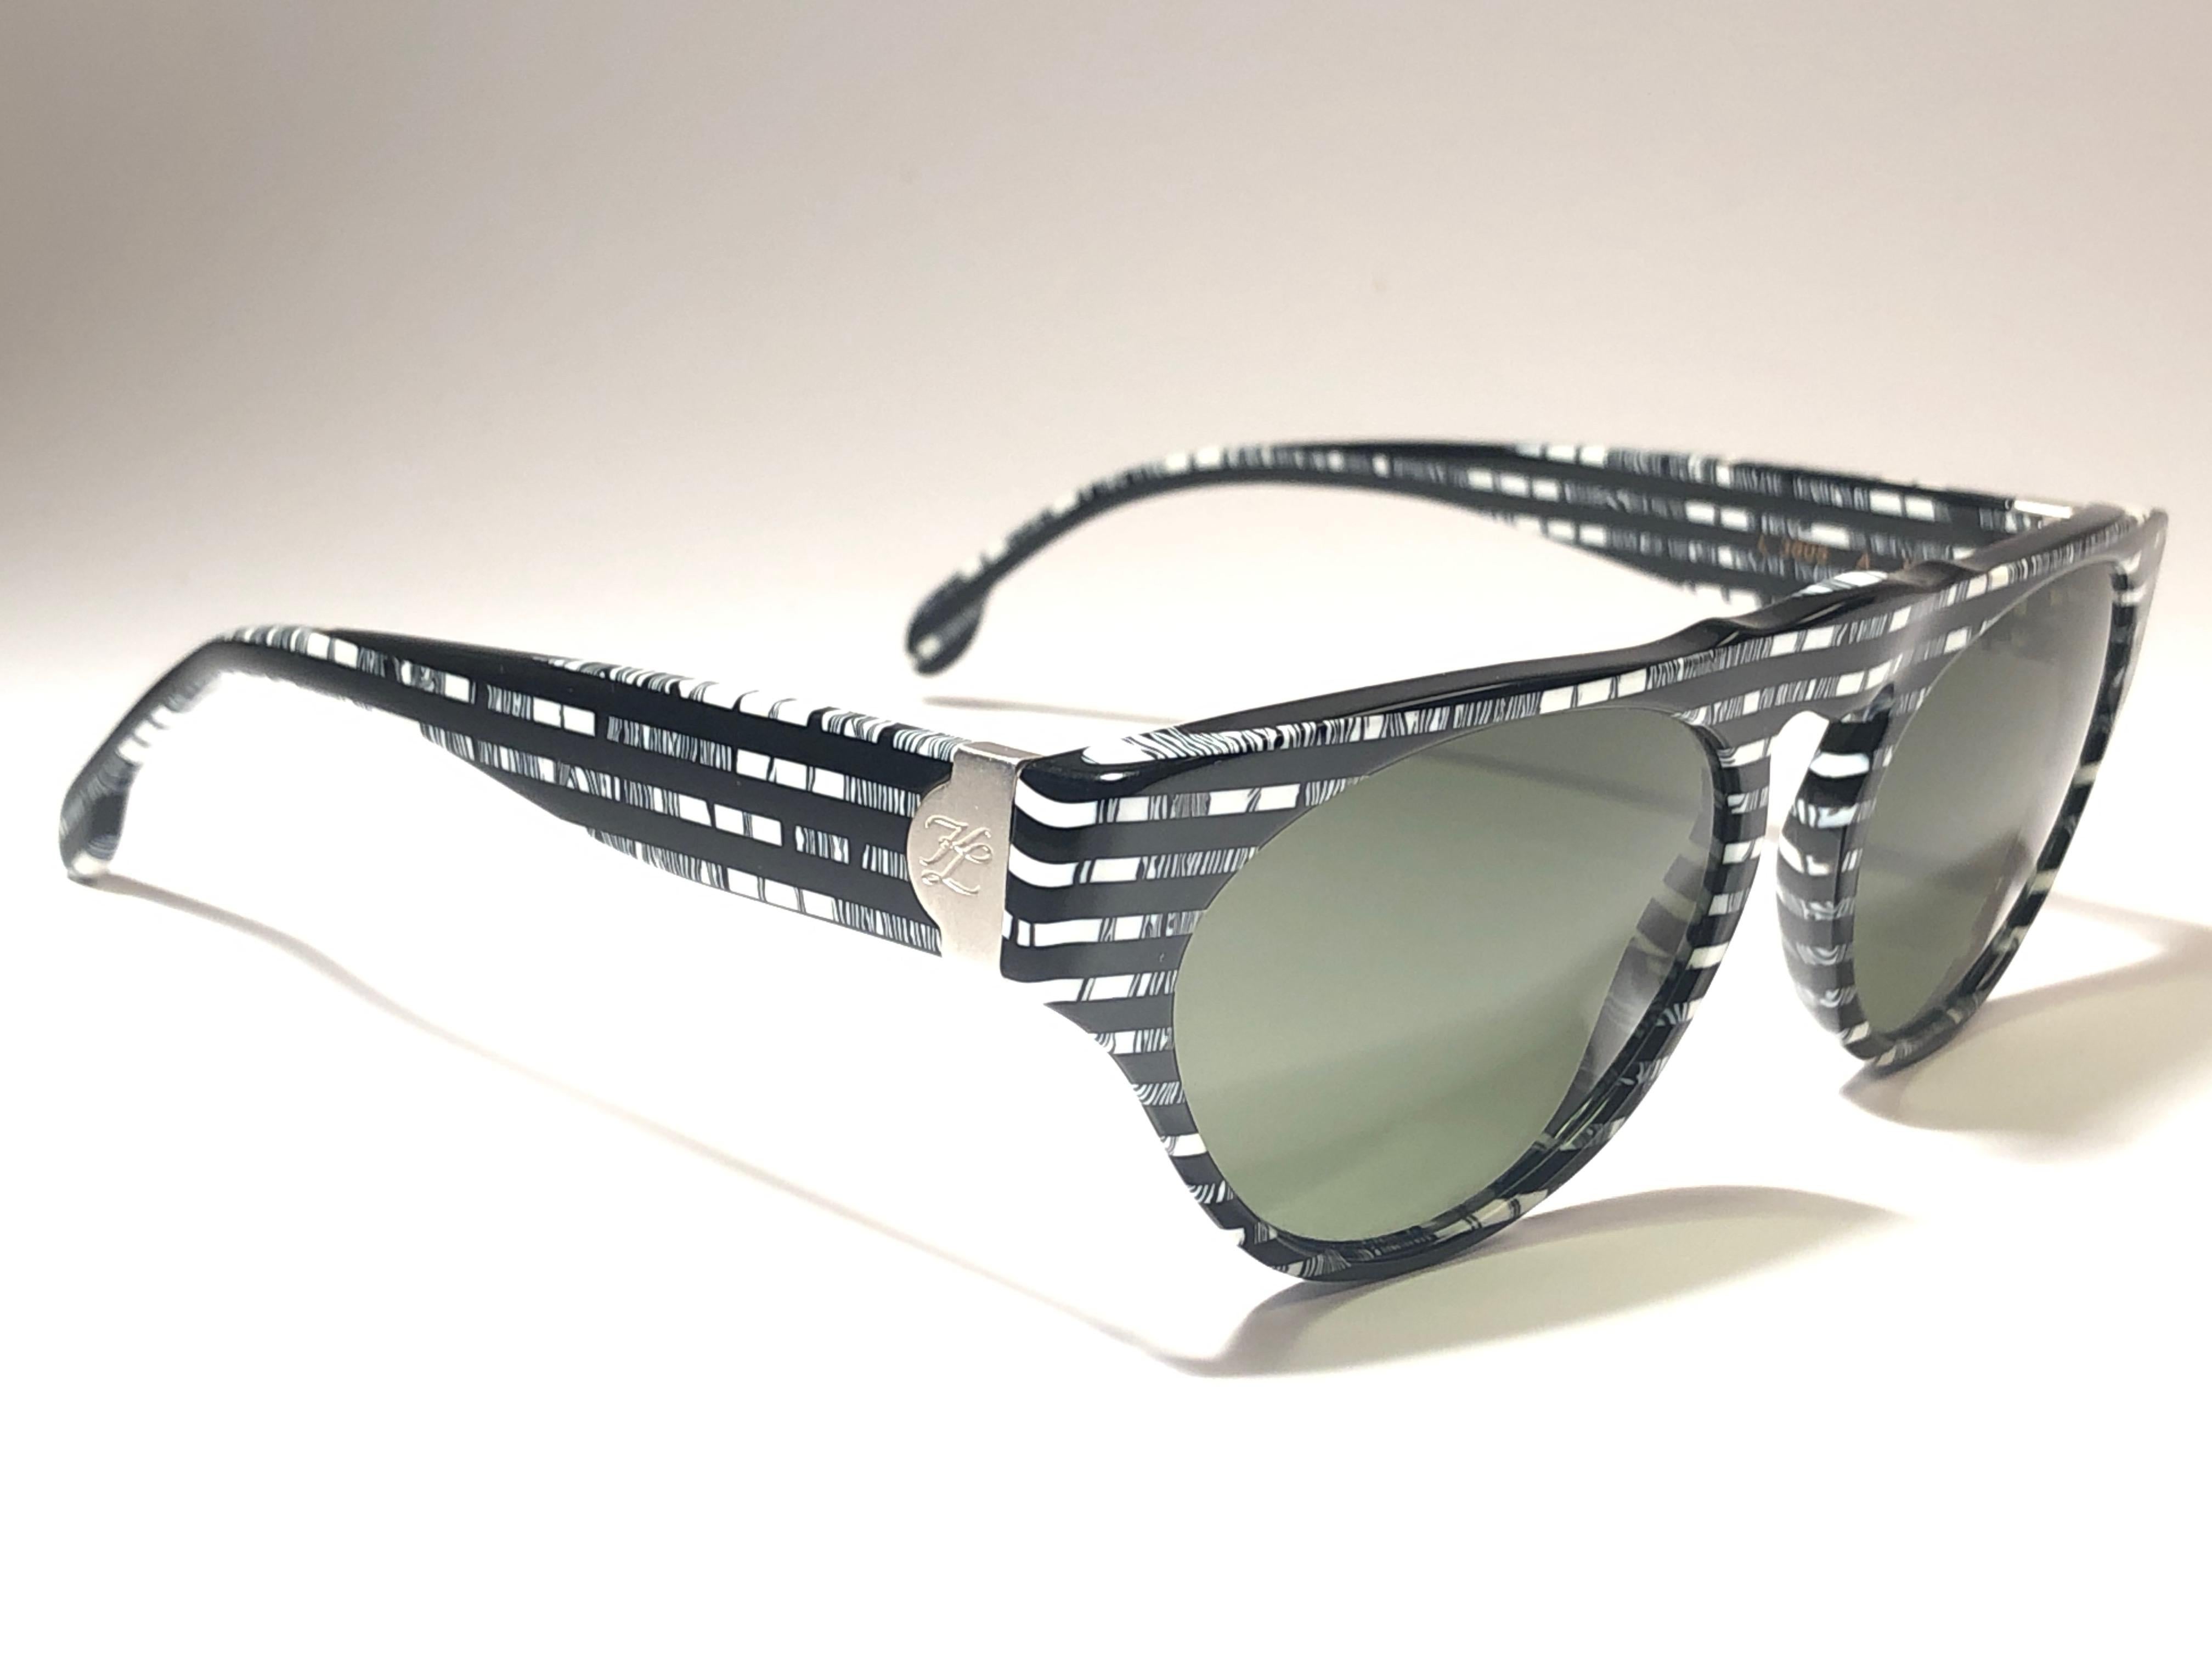 Amazing pair of New vintage 1980's L3605 Karl Lagerfeld black & white black mosaic sunglasses framing a pair of grey lenses.
 
 New, never worn or displayed. This pair may show minor sign of wear due to storage. A true fashion statement .